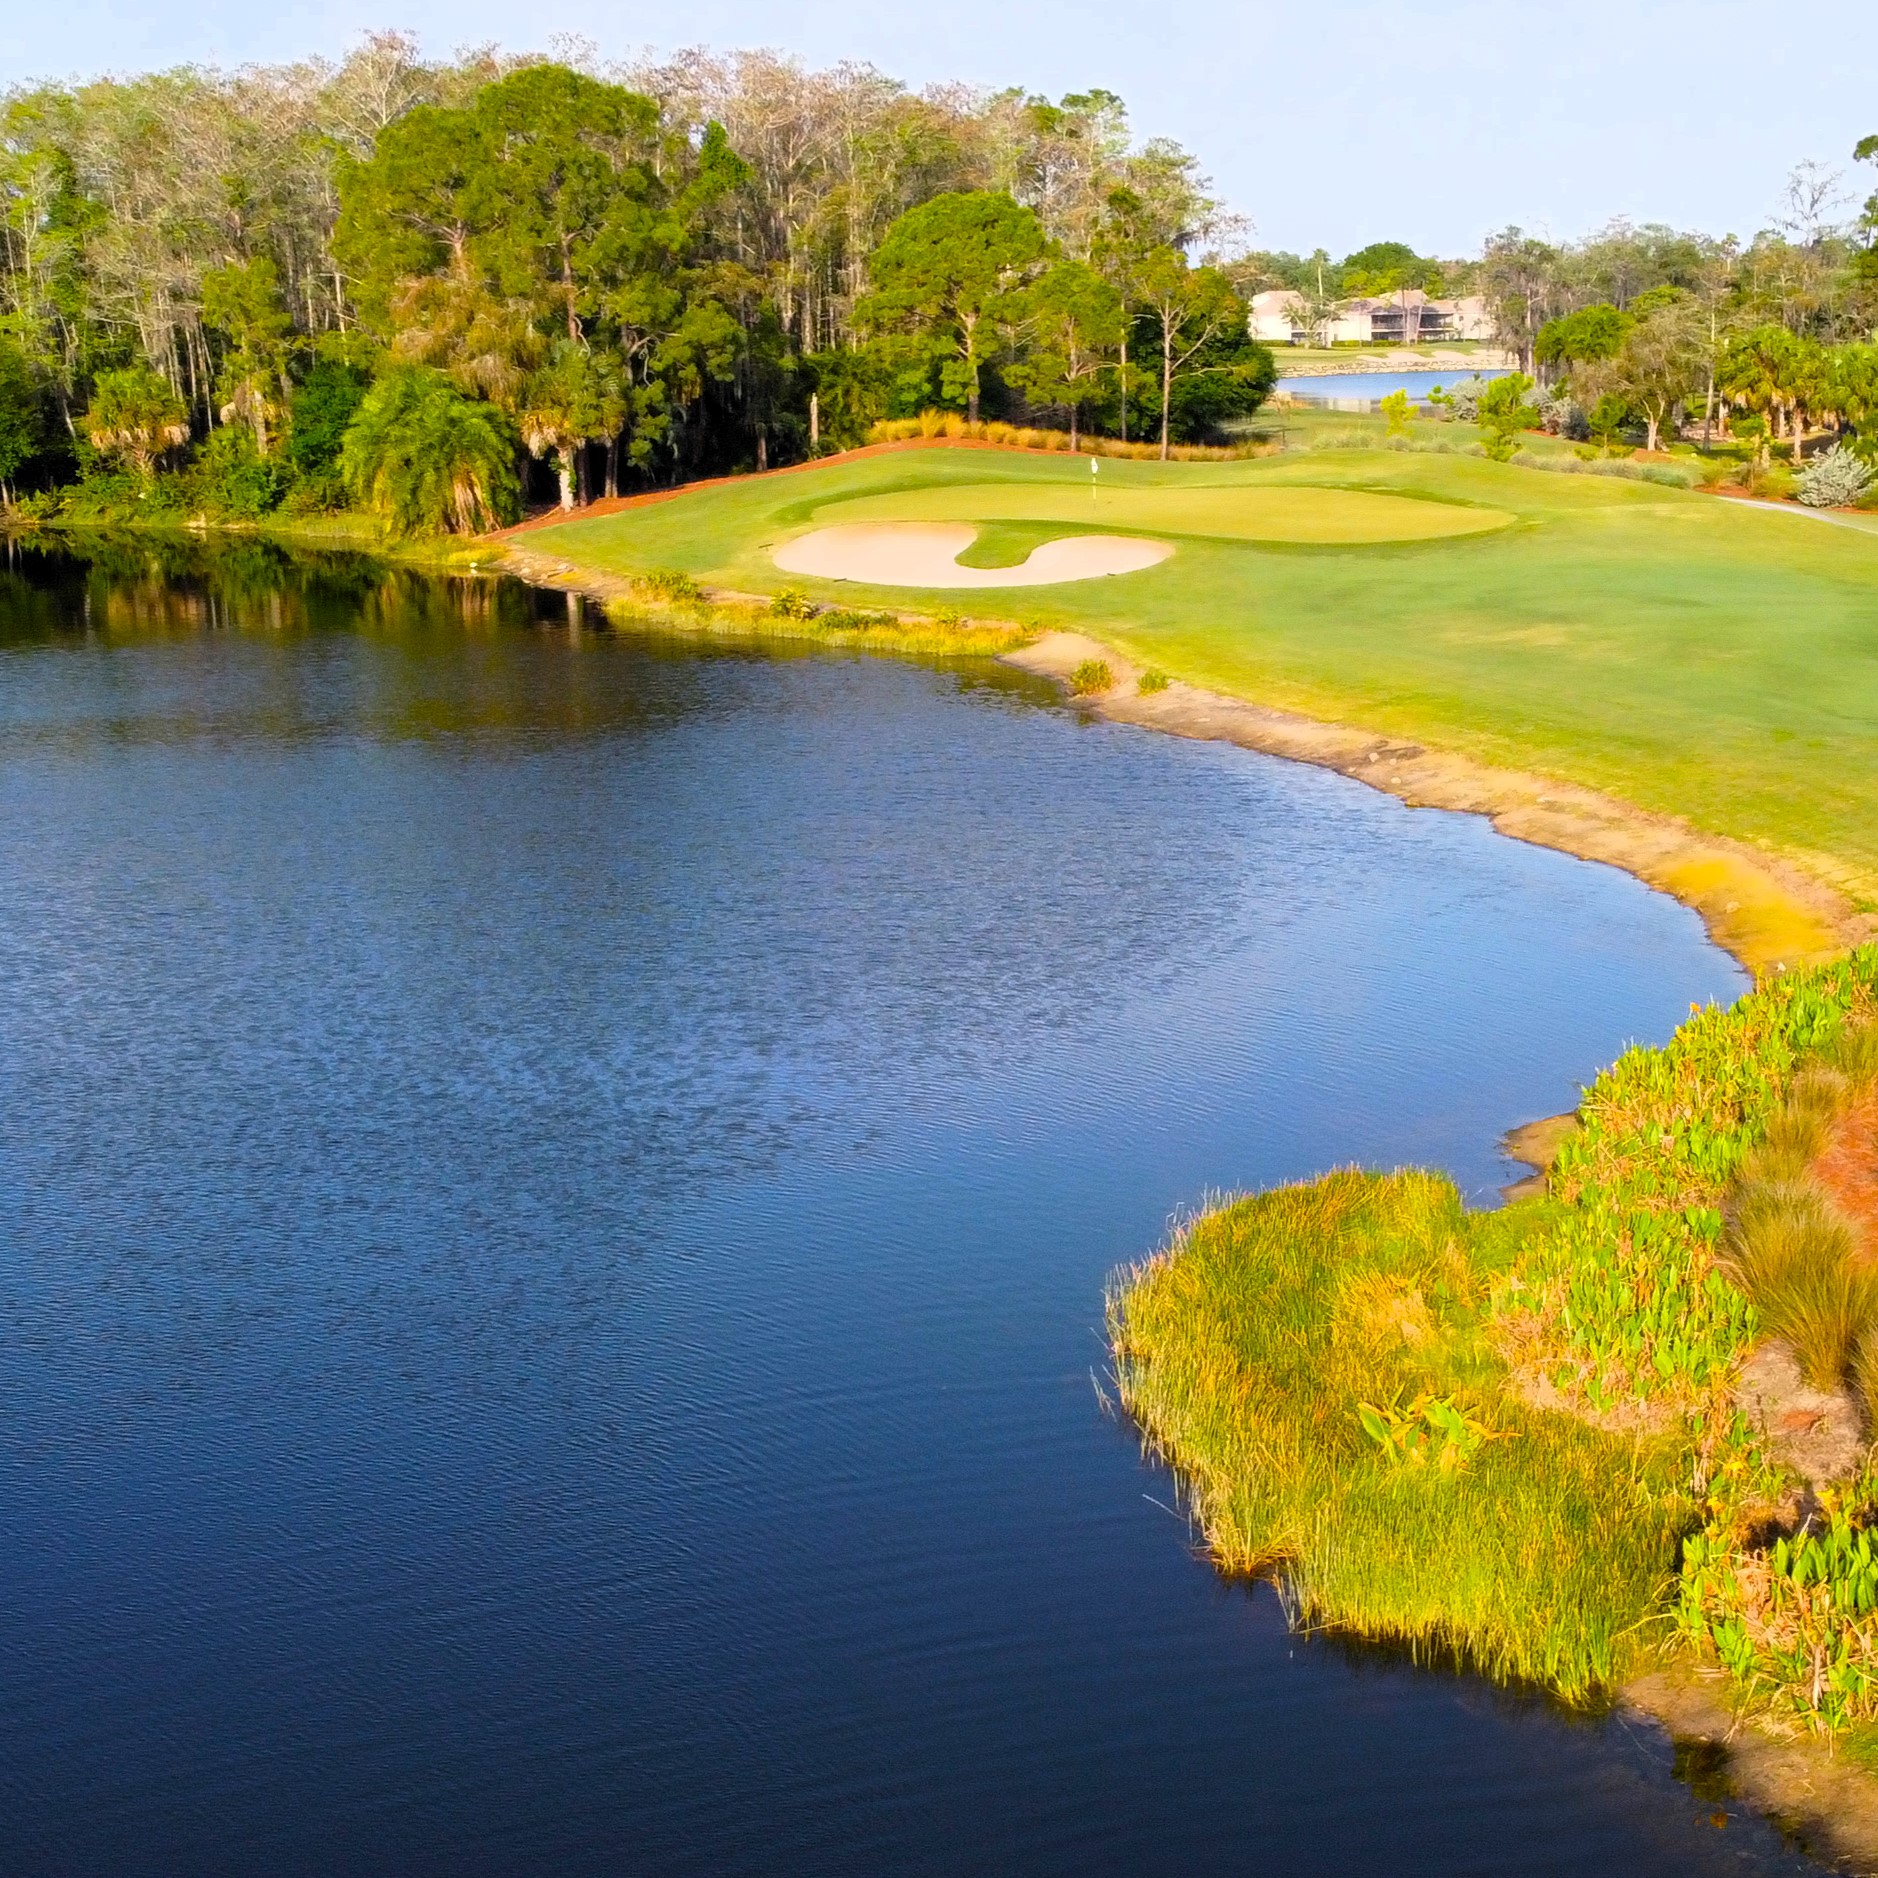 6,645-yard golf course at Fiddlesticks Country Club Fort Myers, Florida